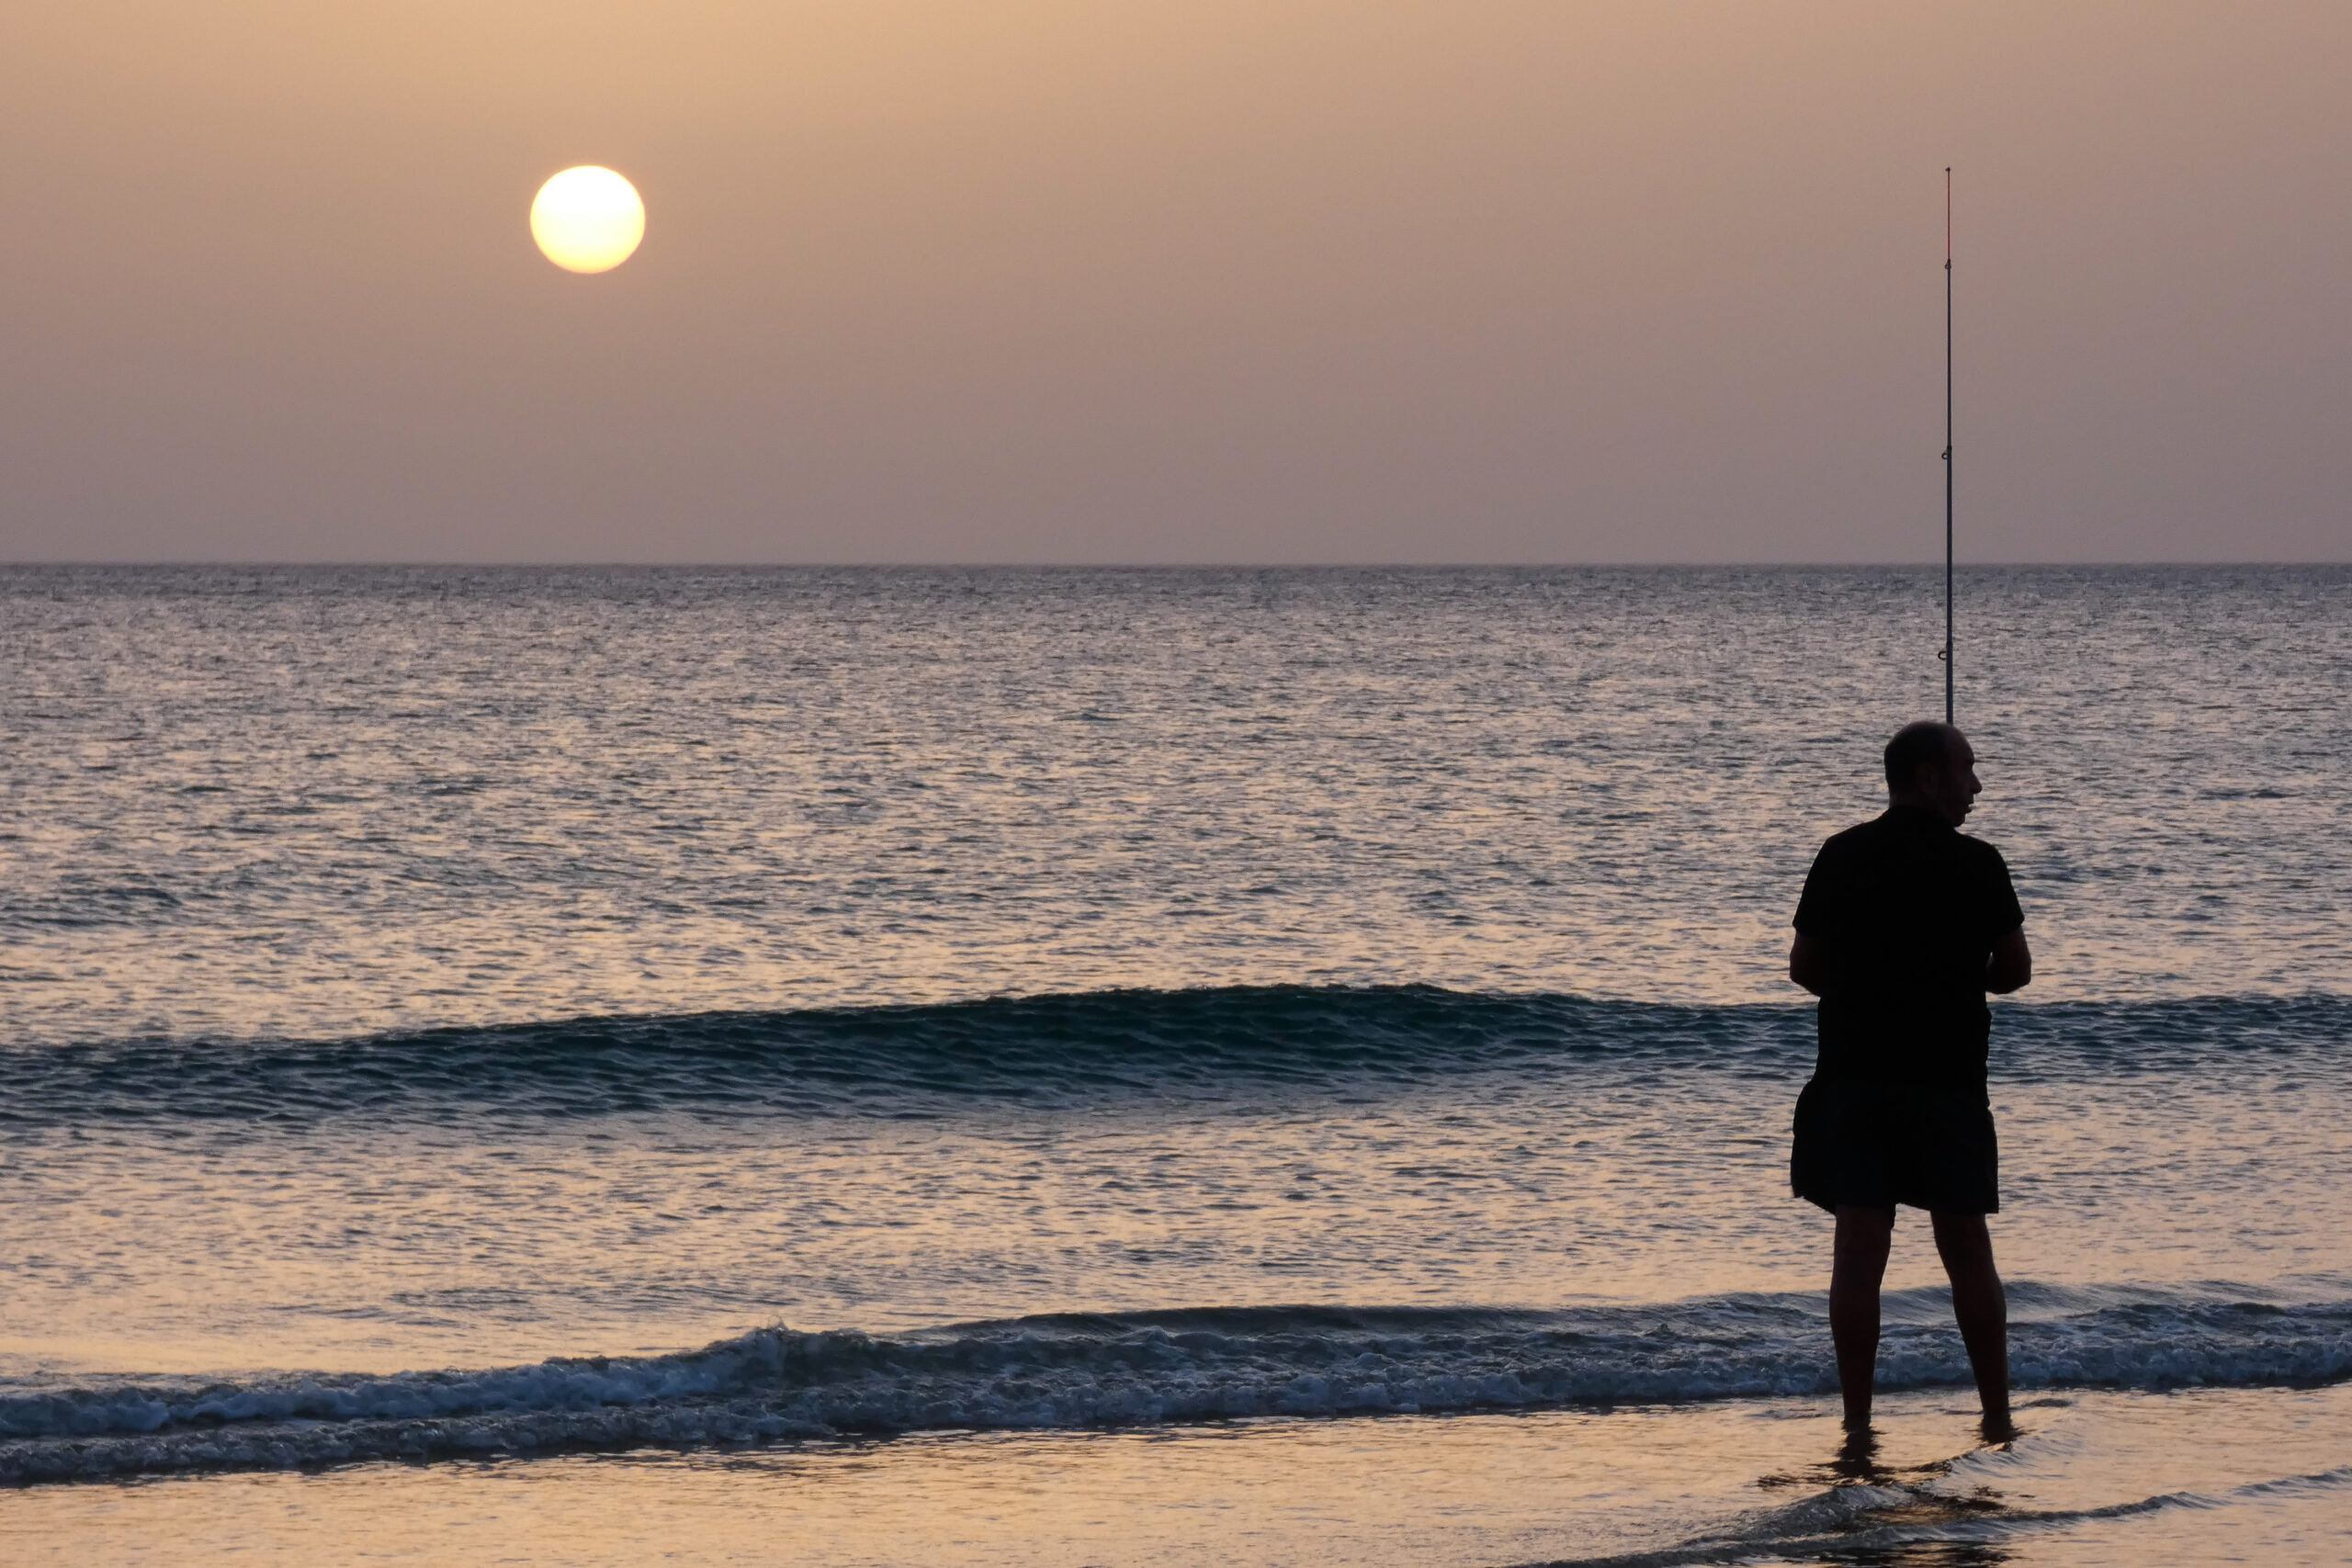 fanatic4fishing.com : Why is saltwater fishing better?